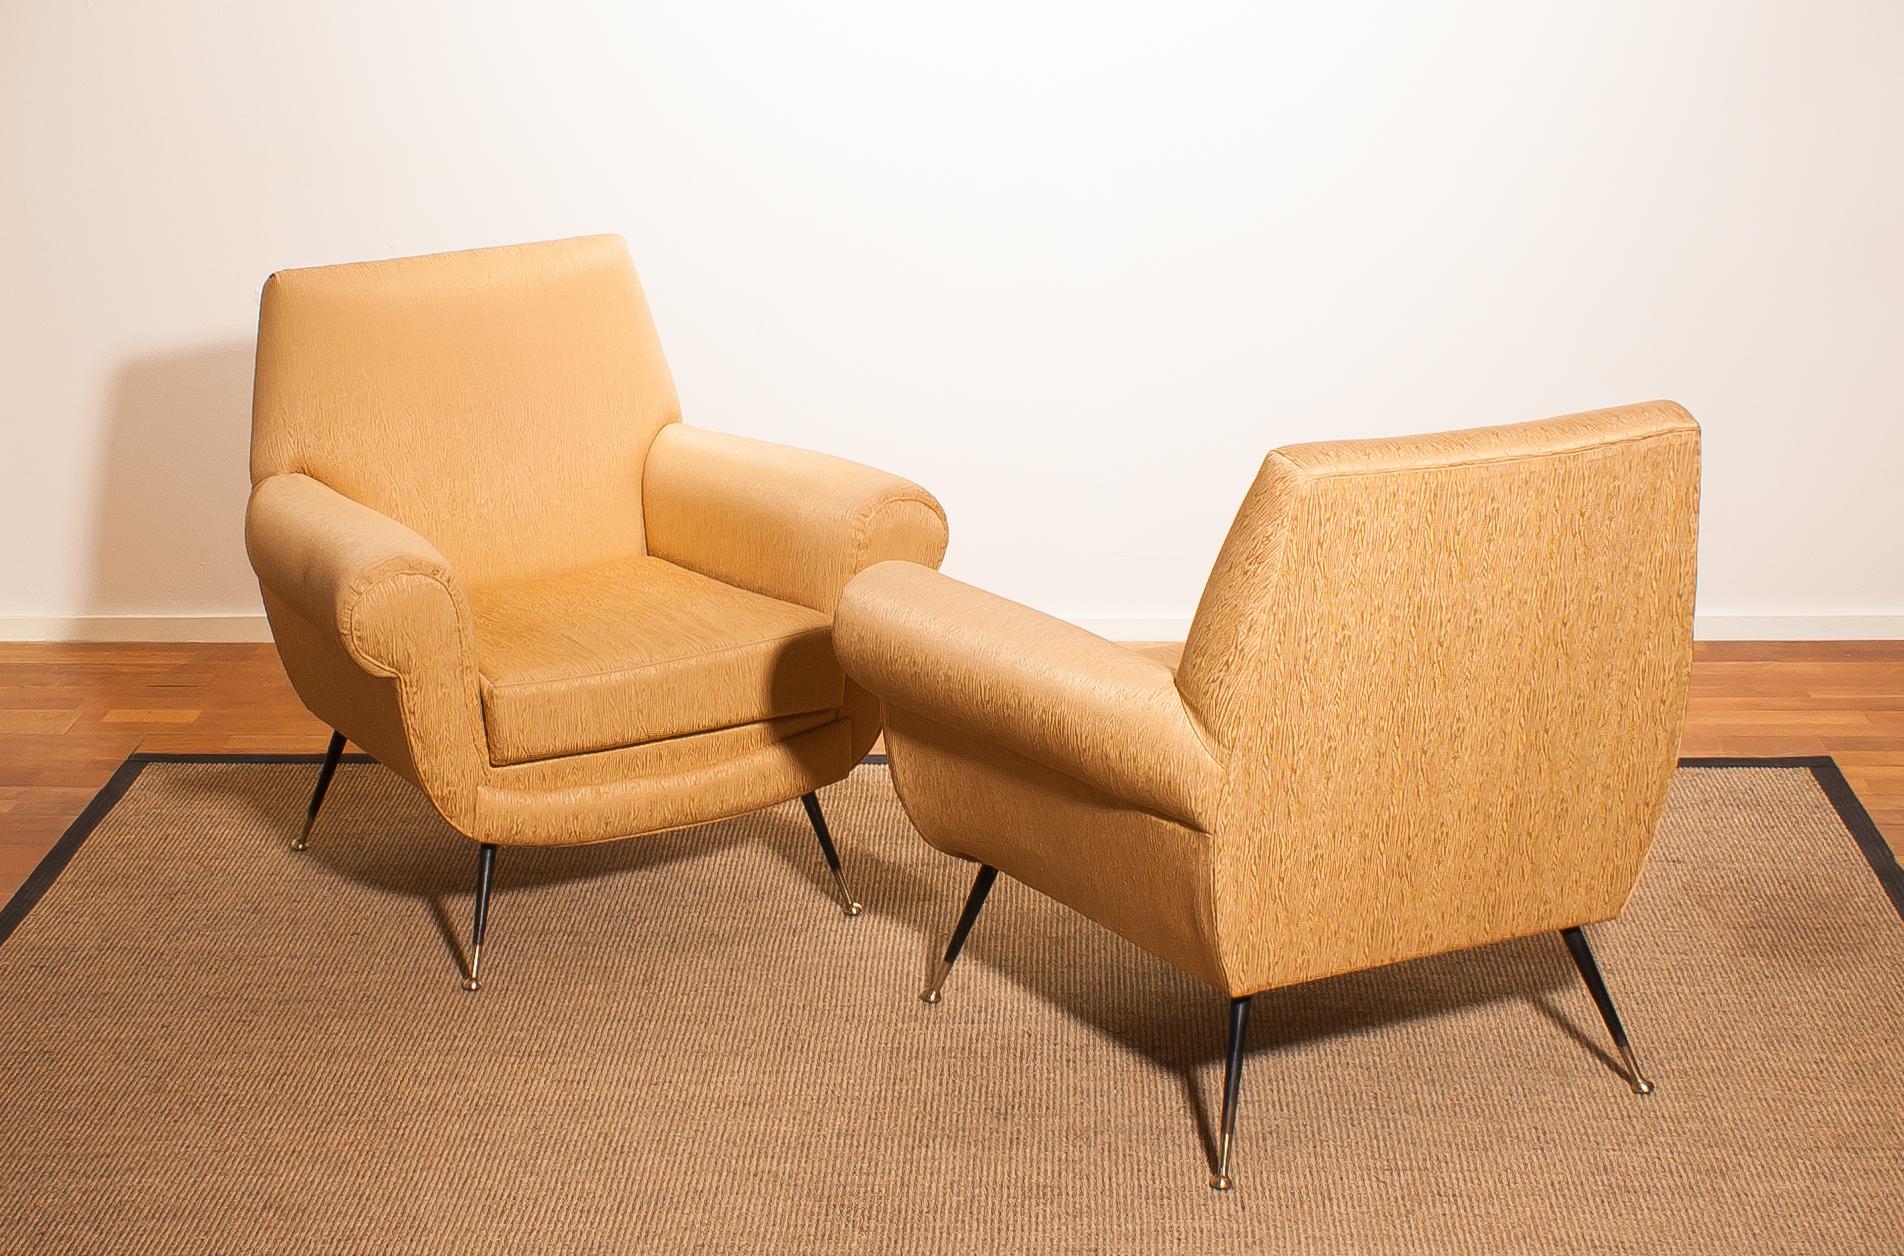 1950s, Brass and Golden Jacquard Set Lounge Chairs by Gigi Radice for Minotti 4